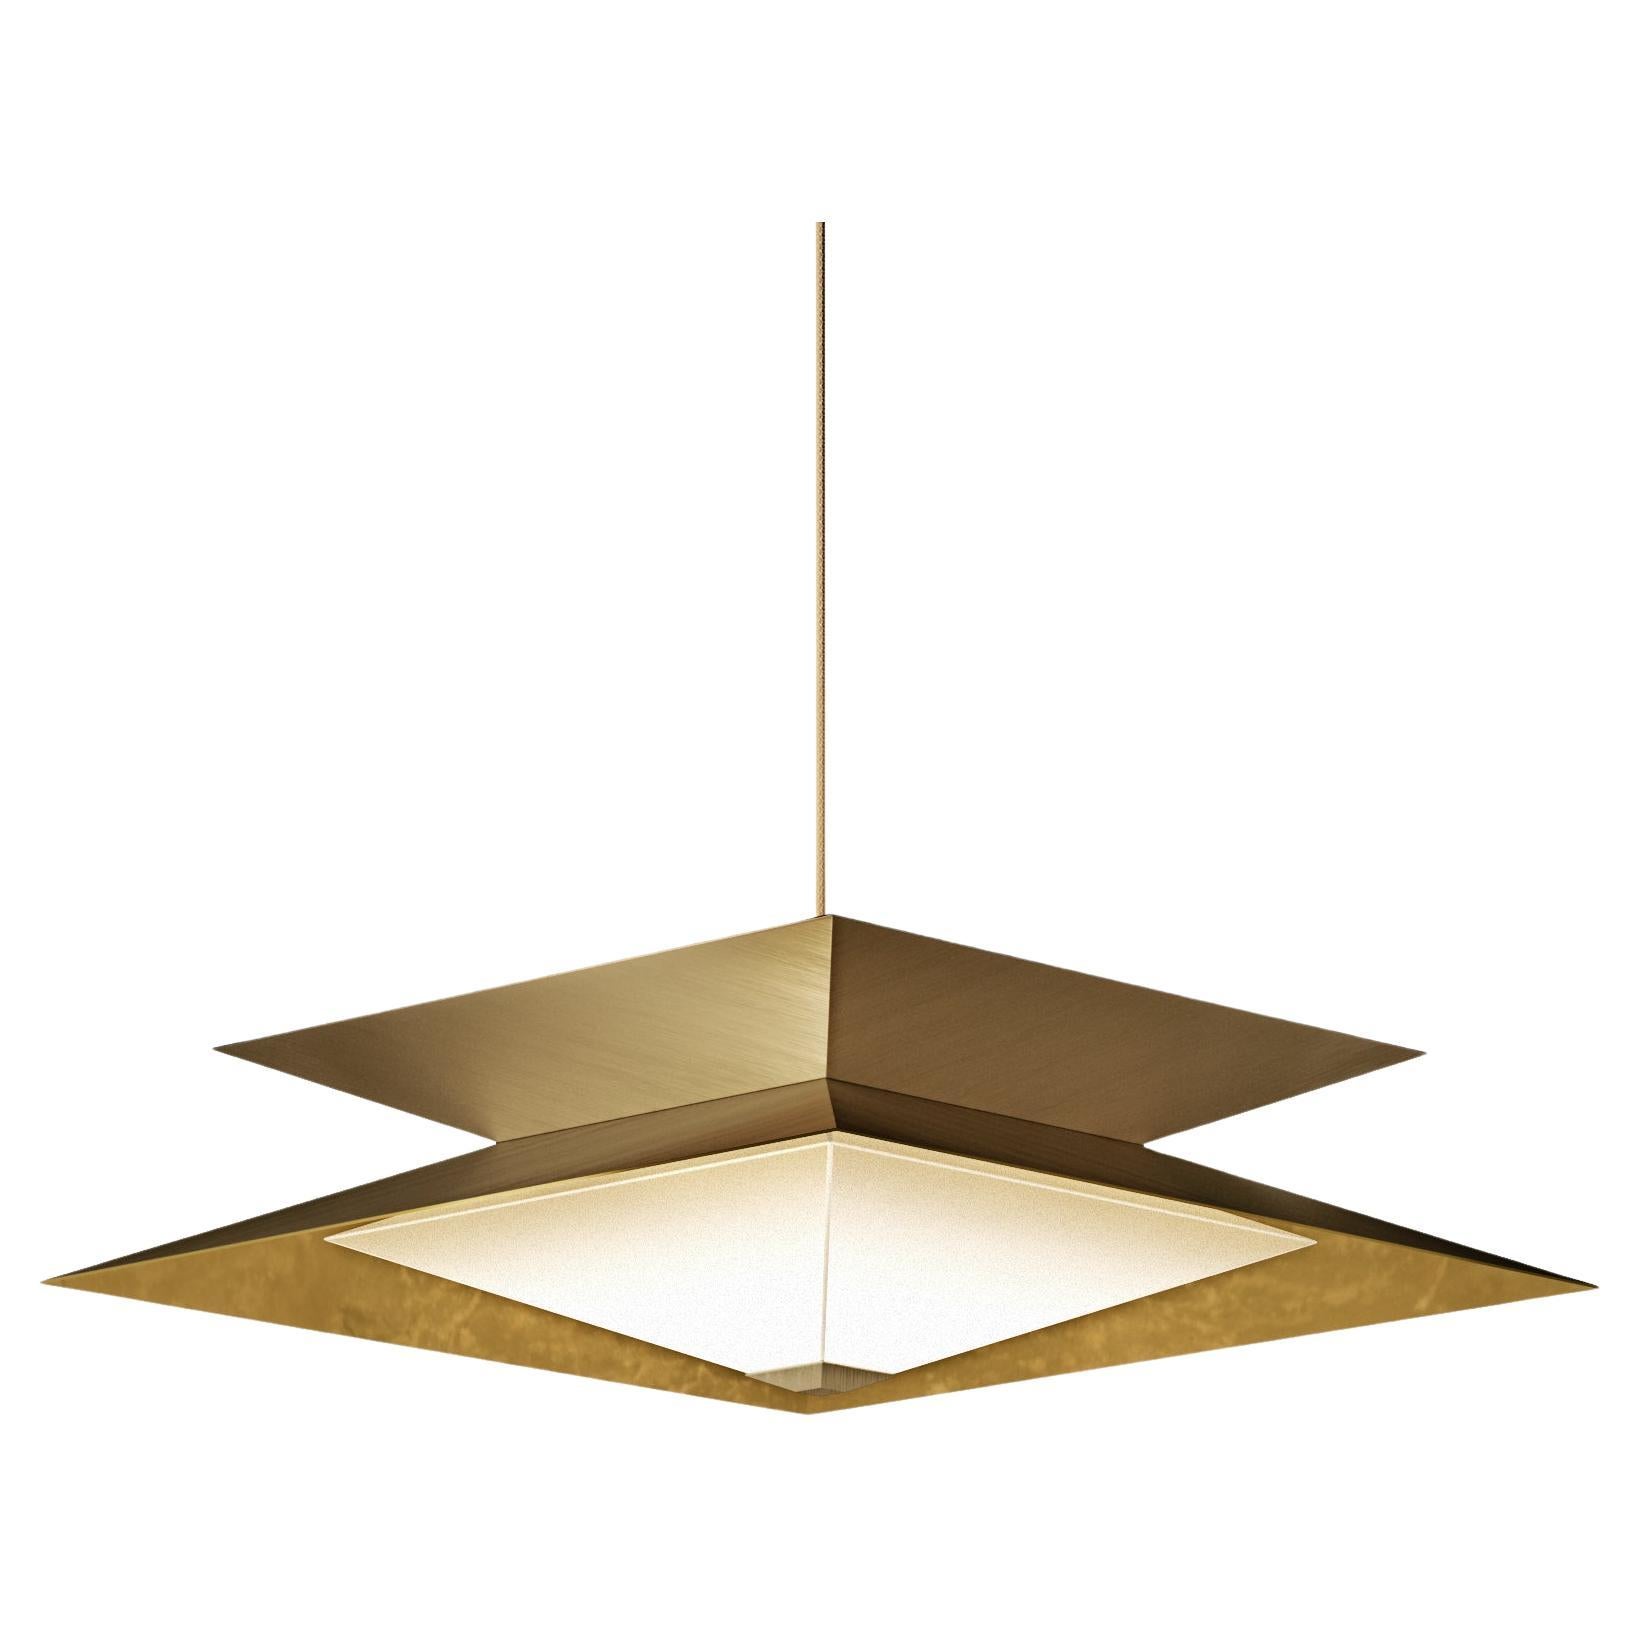 Octa Twin Pendant Lighting Brass by Diaphan Studio, REP by Tuleste Factory For Sale